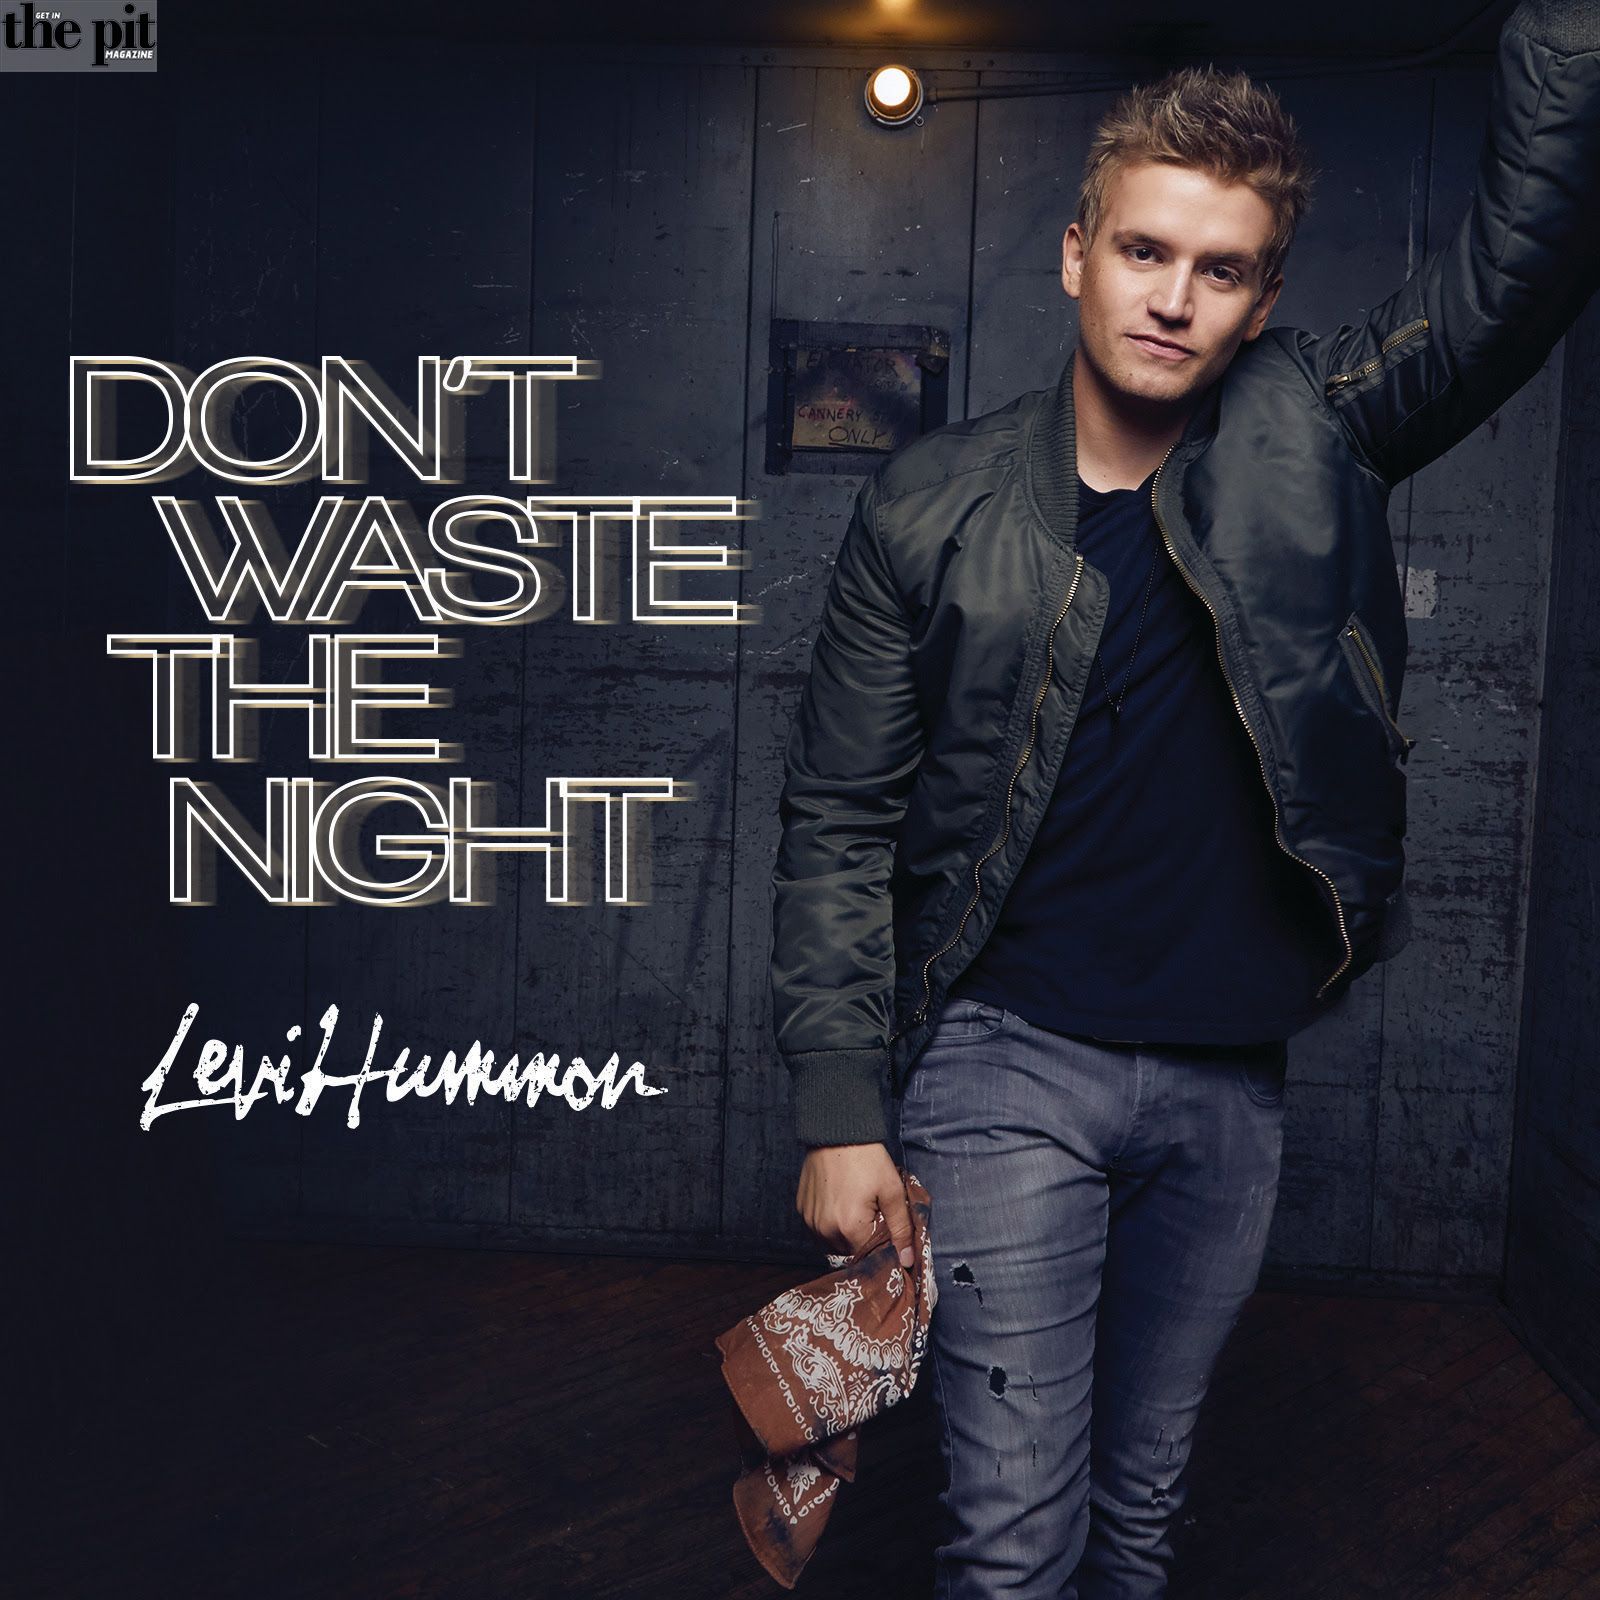 The Pit Magazine, Levi Hummon, Don't Waste The Night